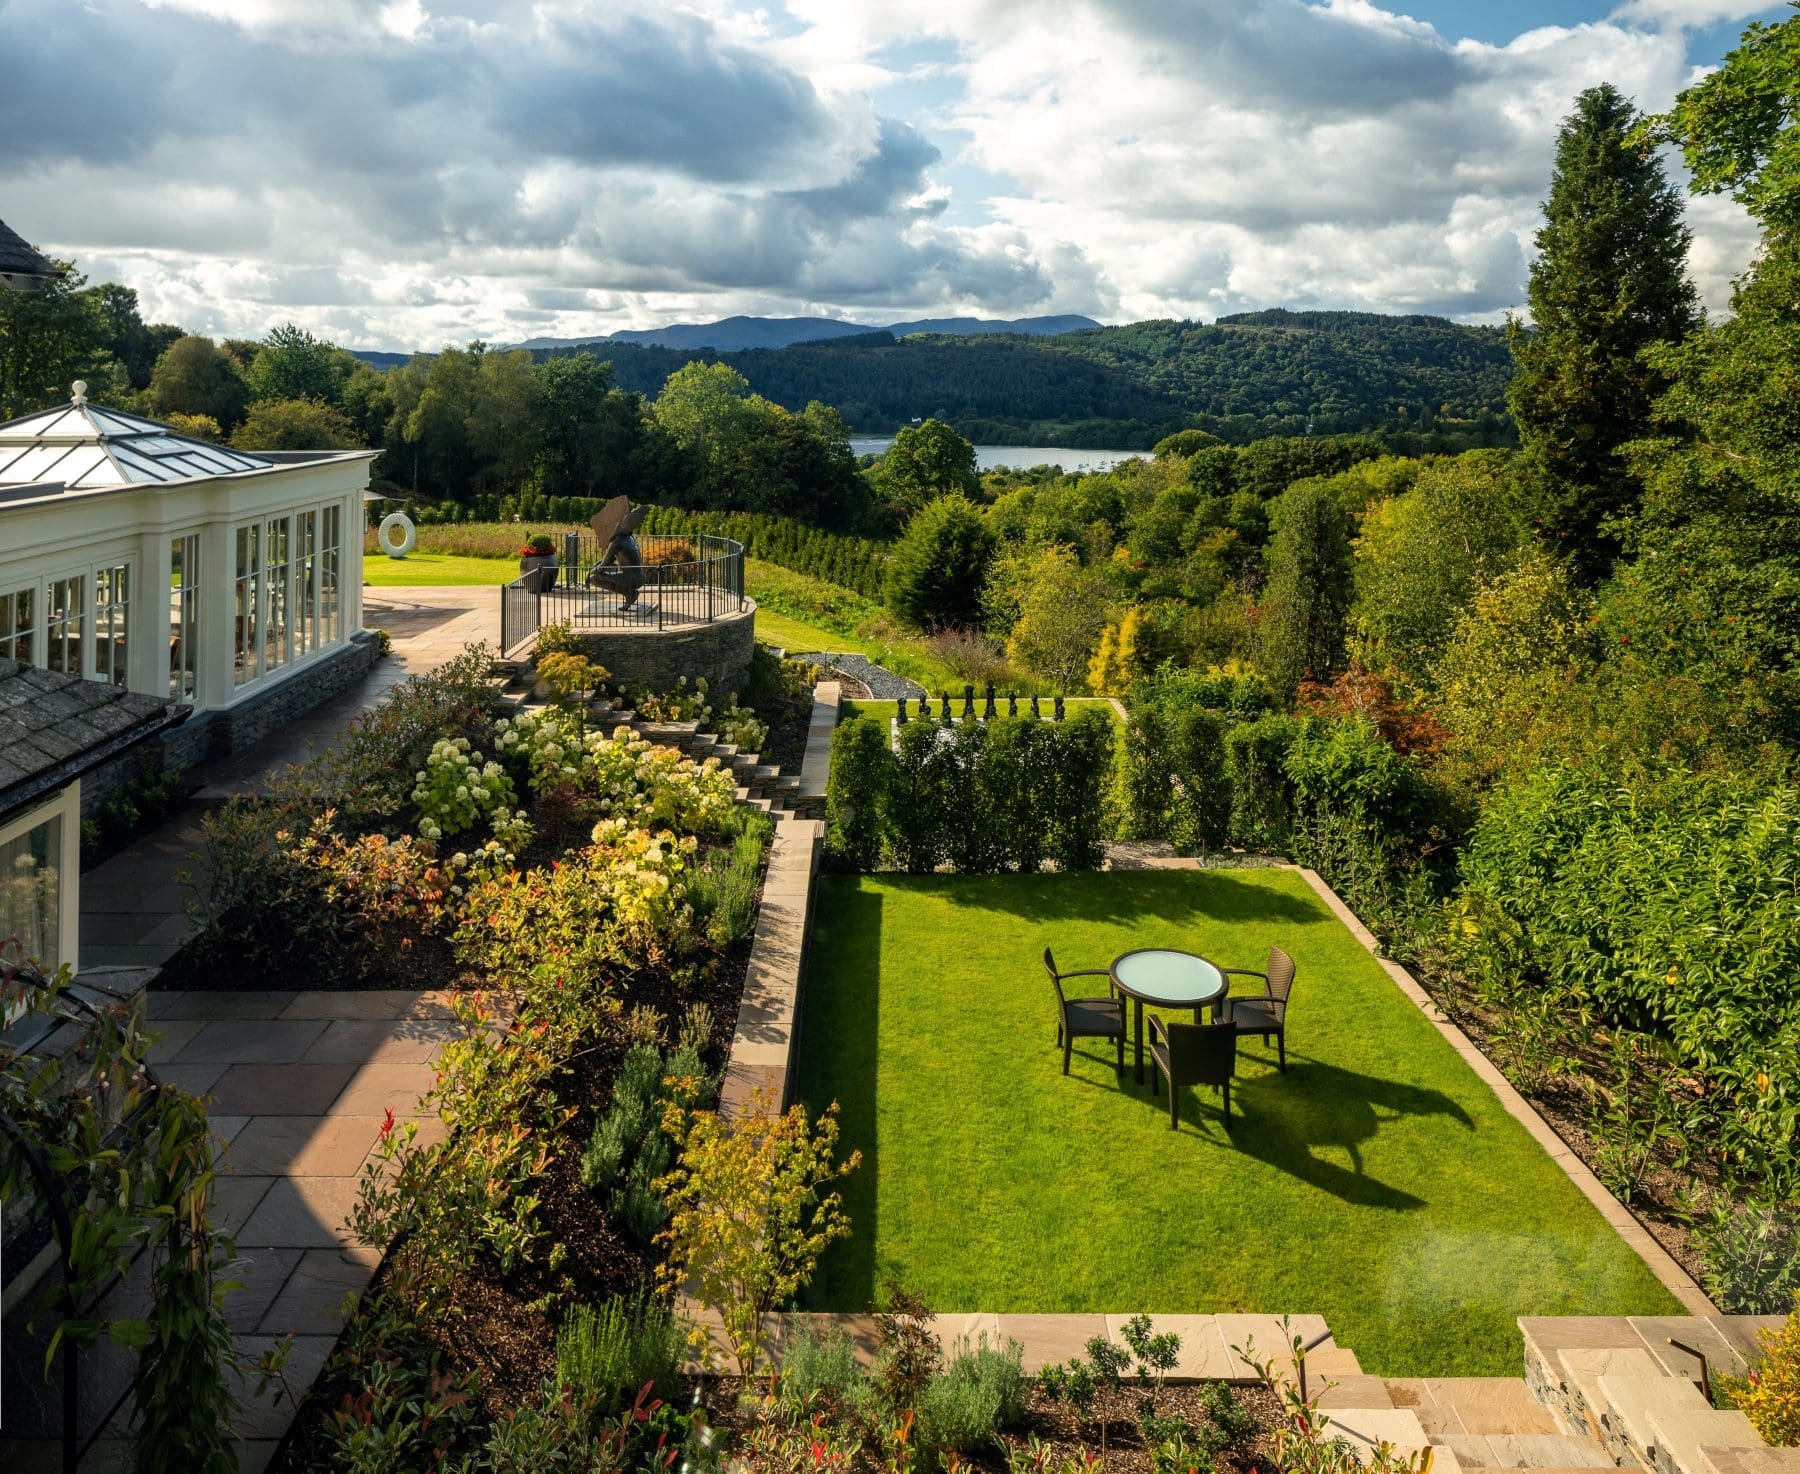 Linthwaite House - gardens and view over Windermere